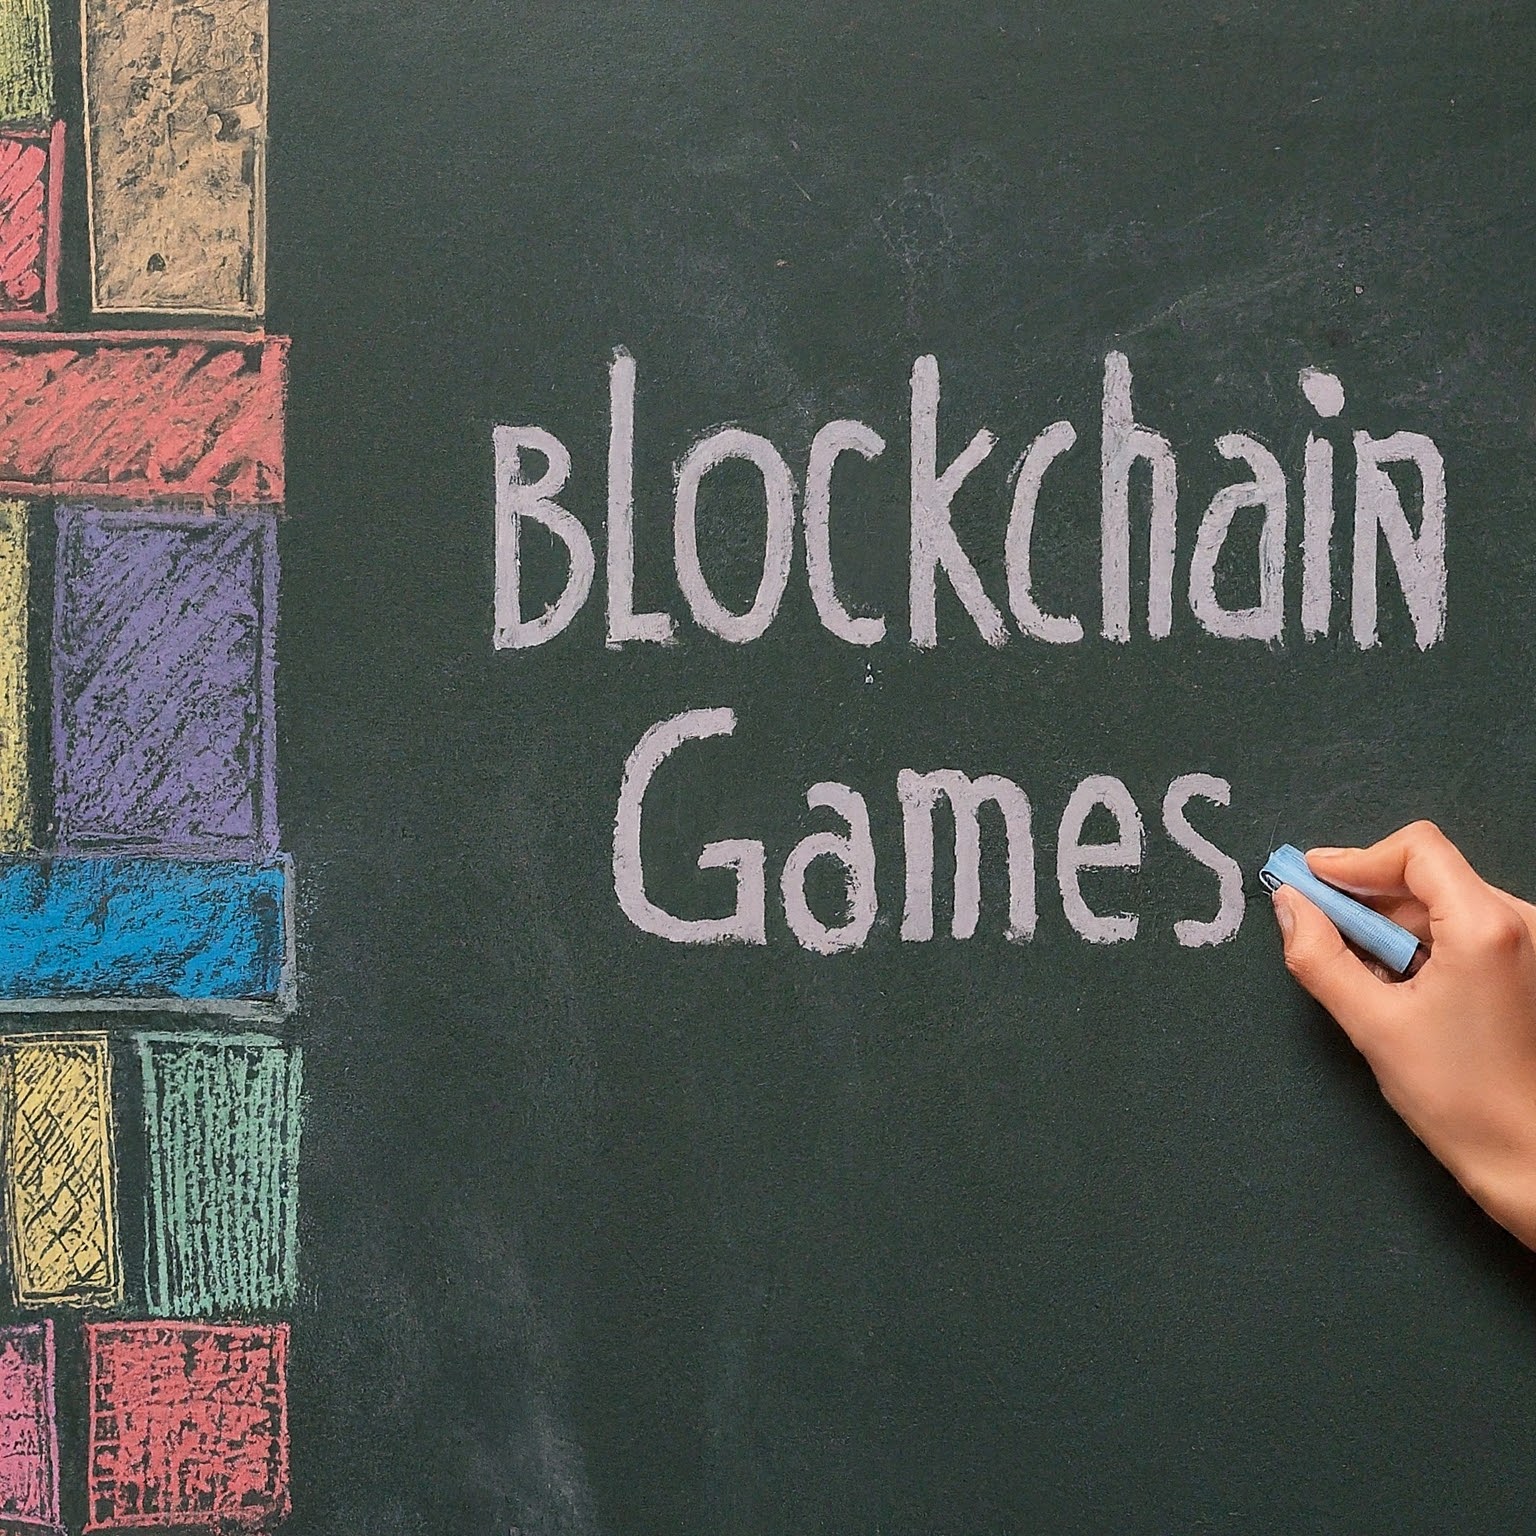 What Are Blockchain Games?